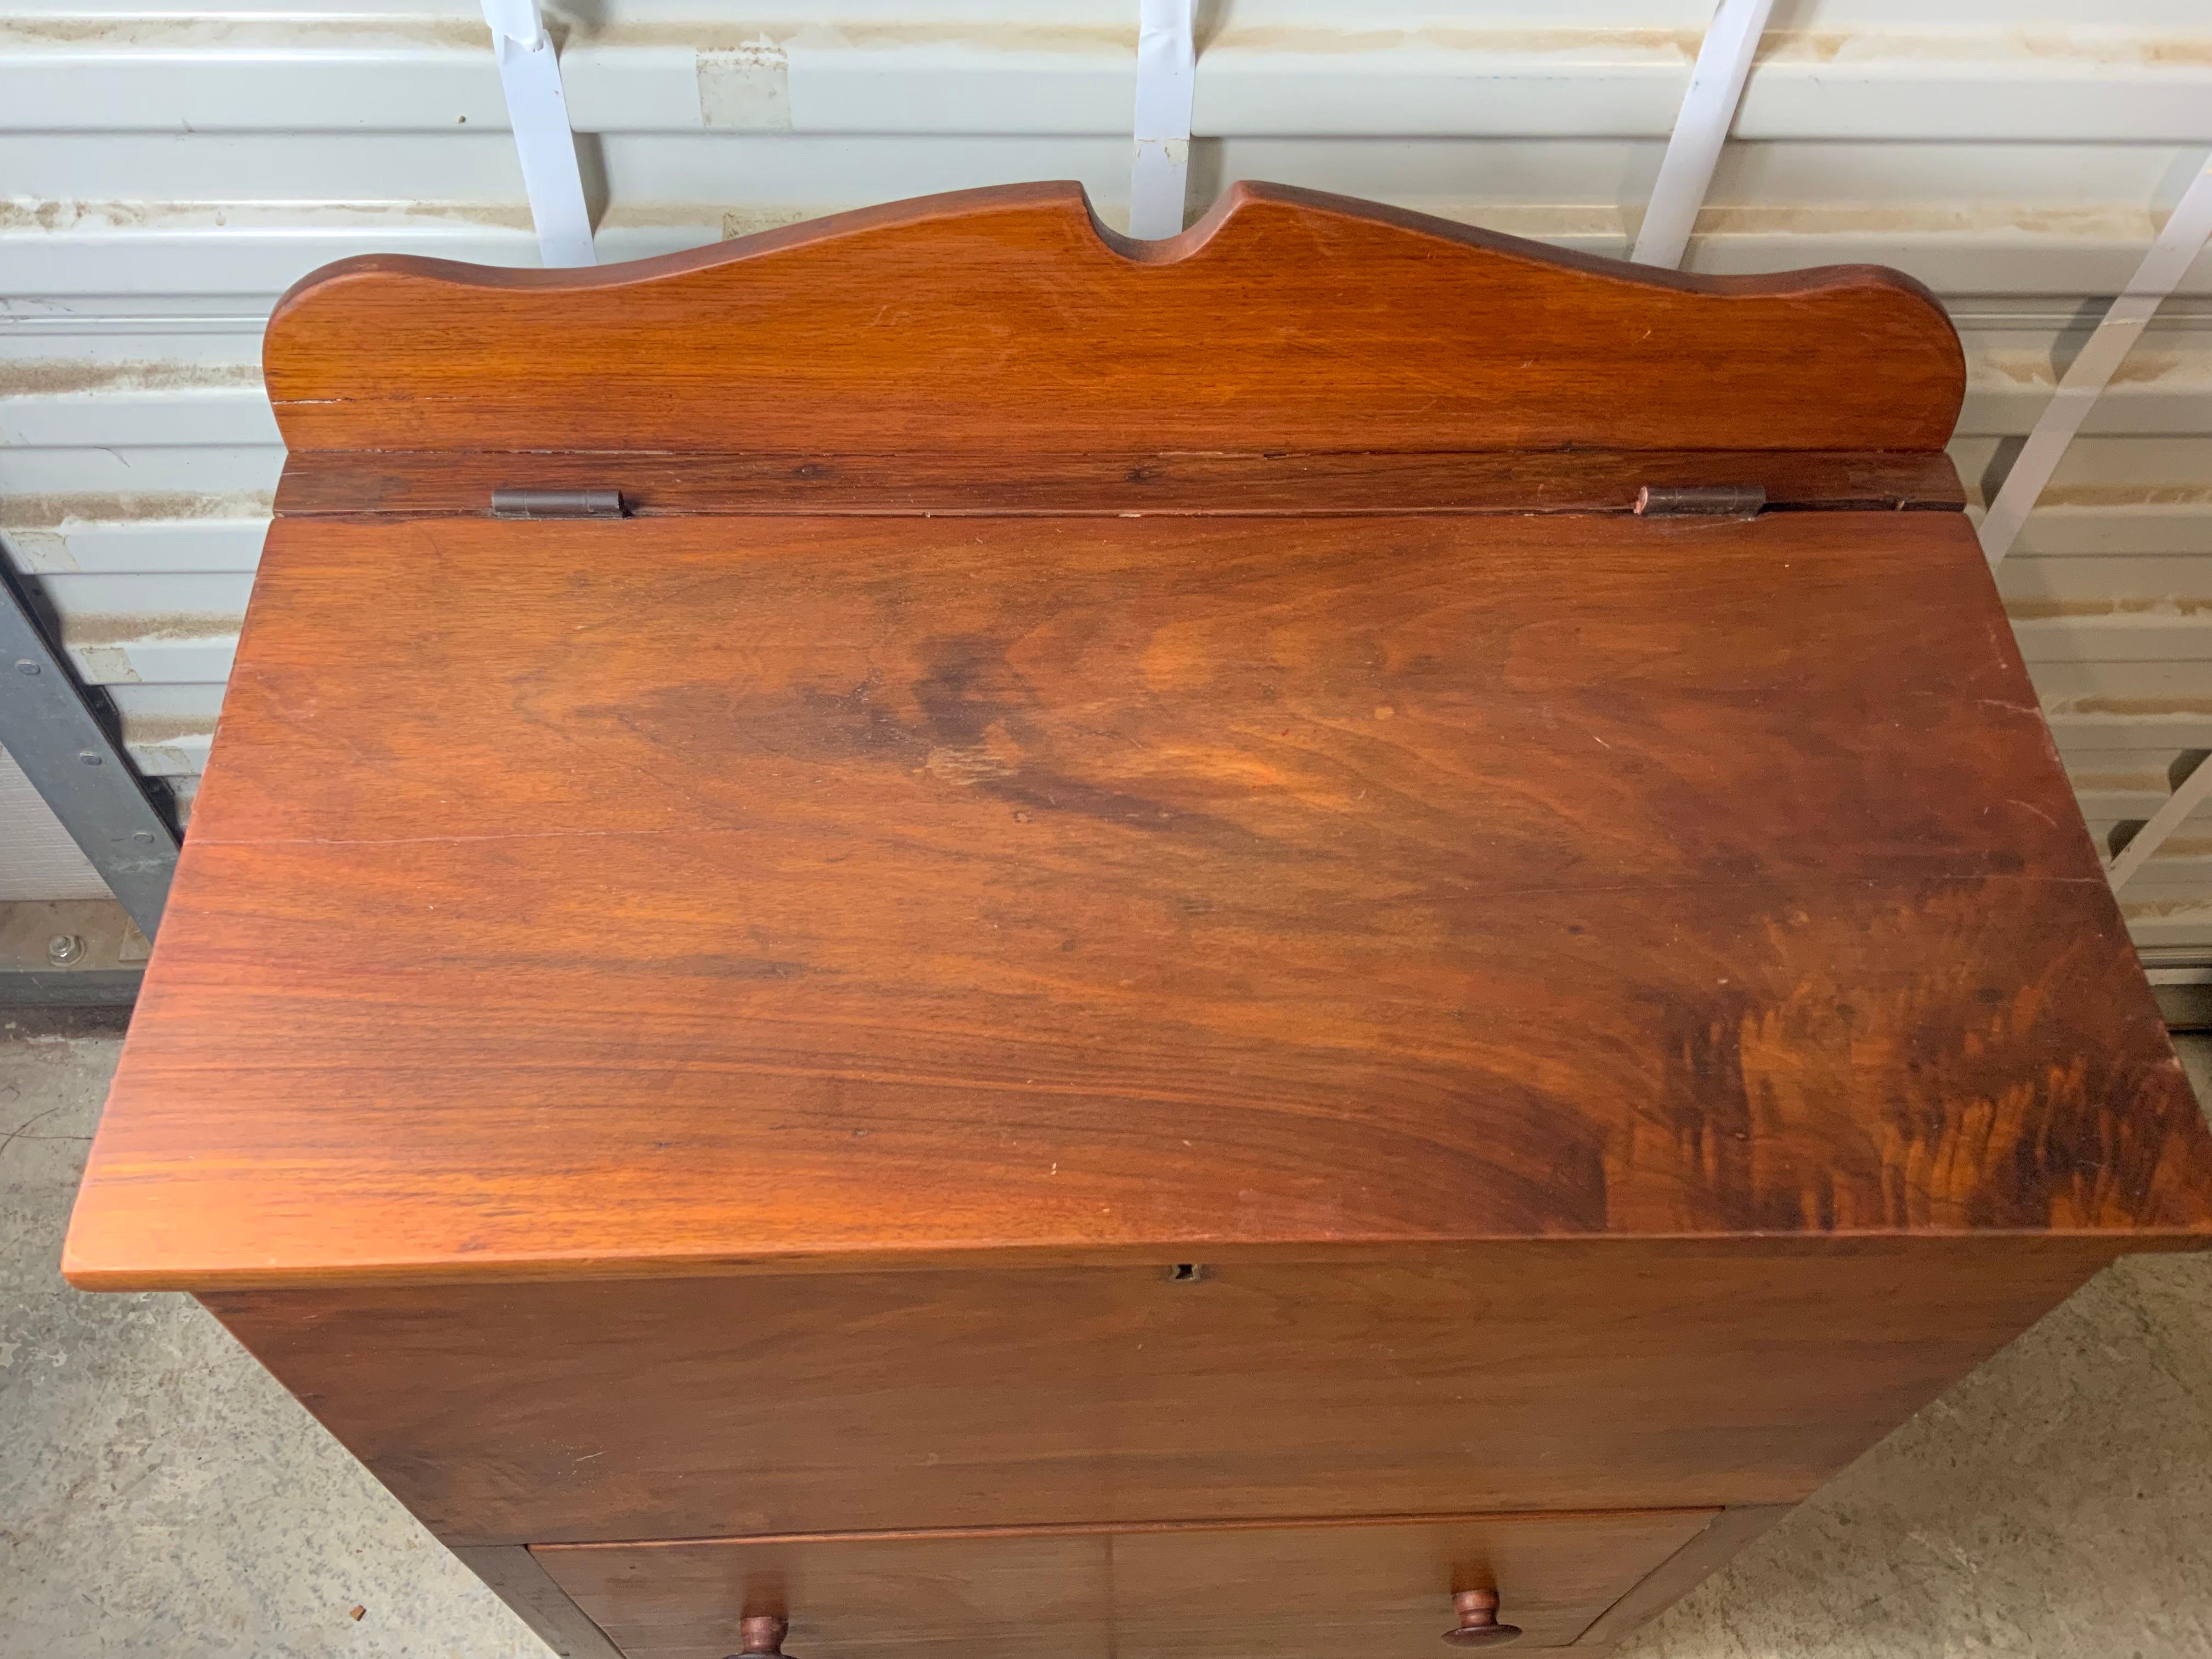 A nice late 19th century southern lift top Chest probably Tennessee or Virginia constructed of Walnut with pine and Poplar as a secondary case wood. The person I purchased it from was from Tennessee and told me her family had always used it as a